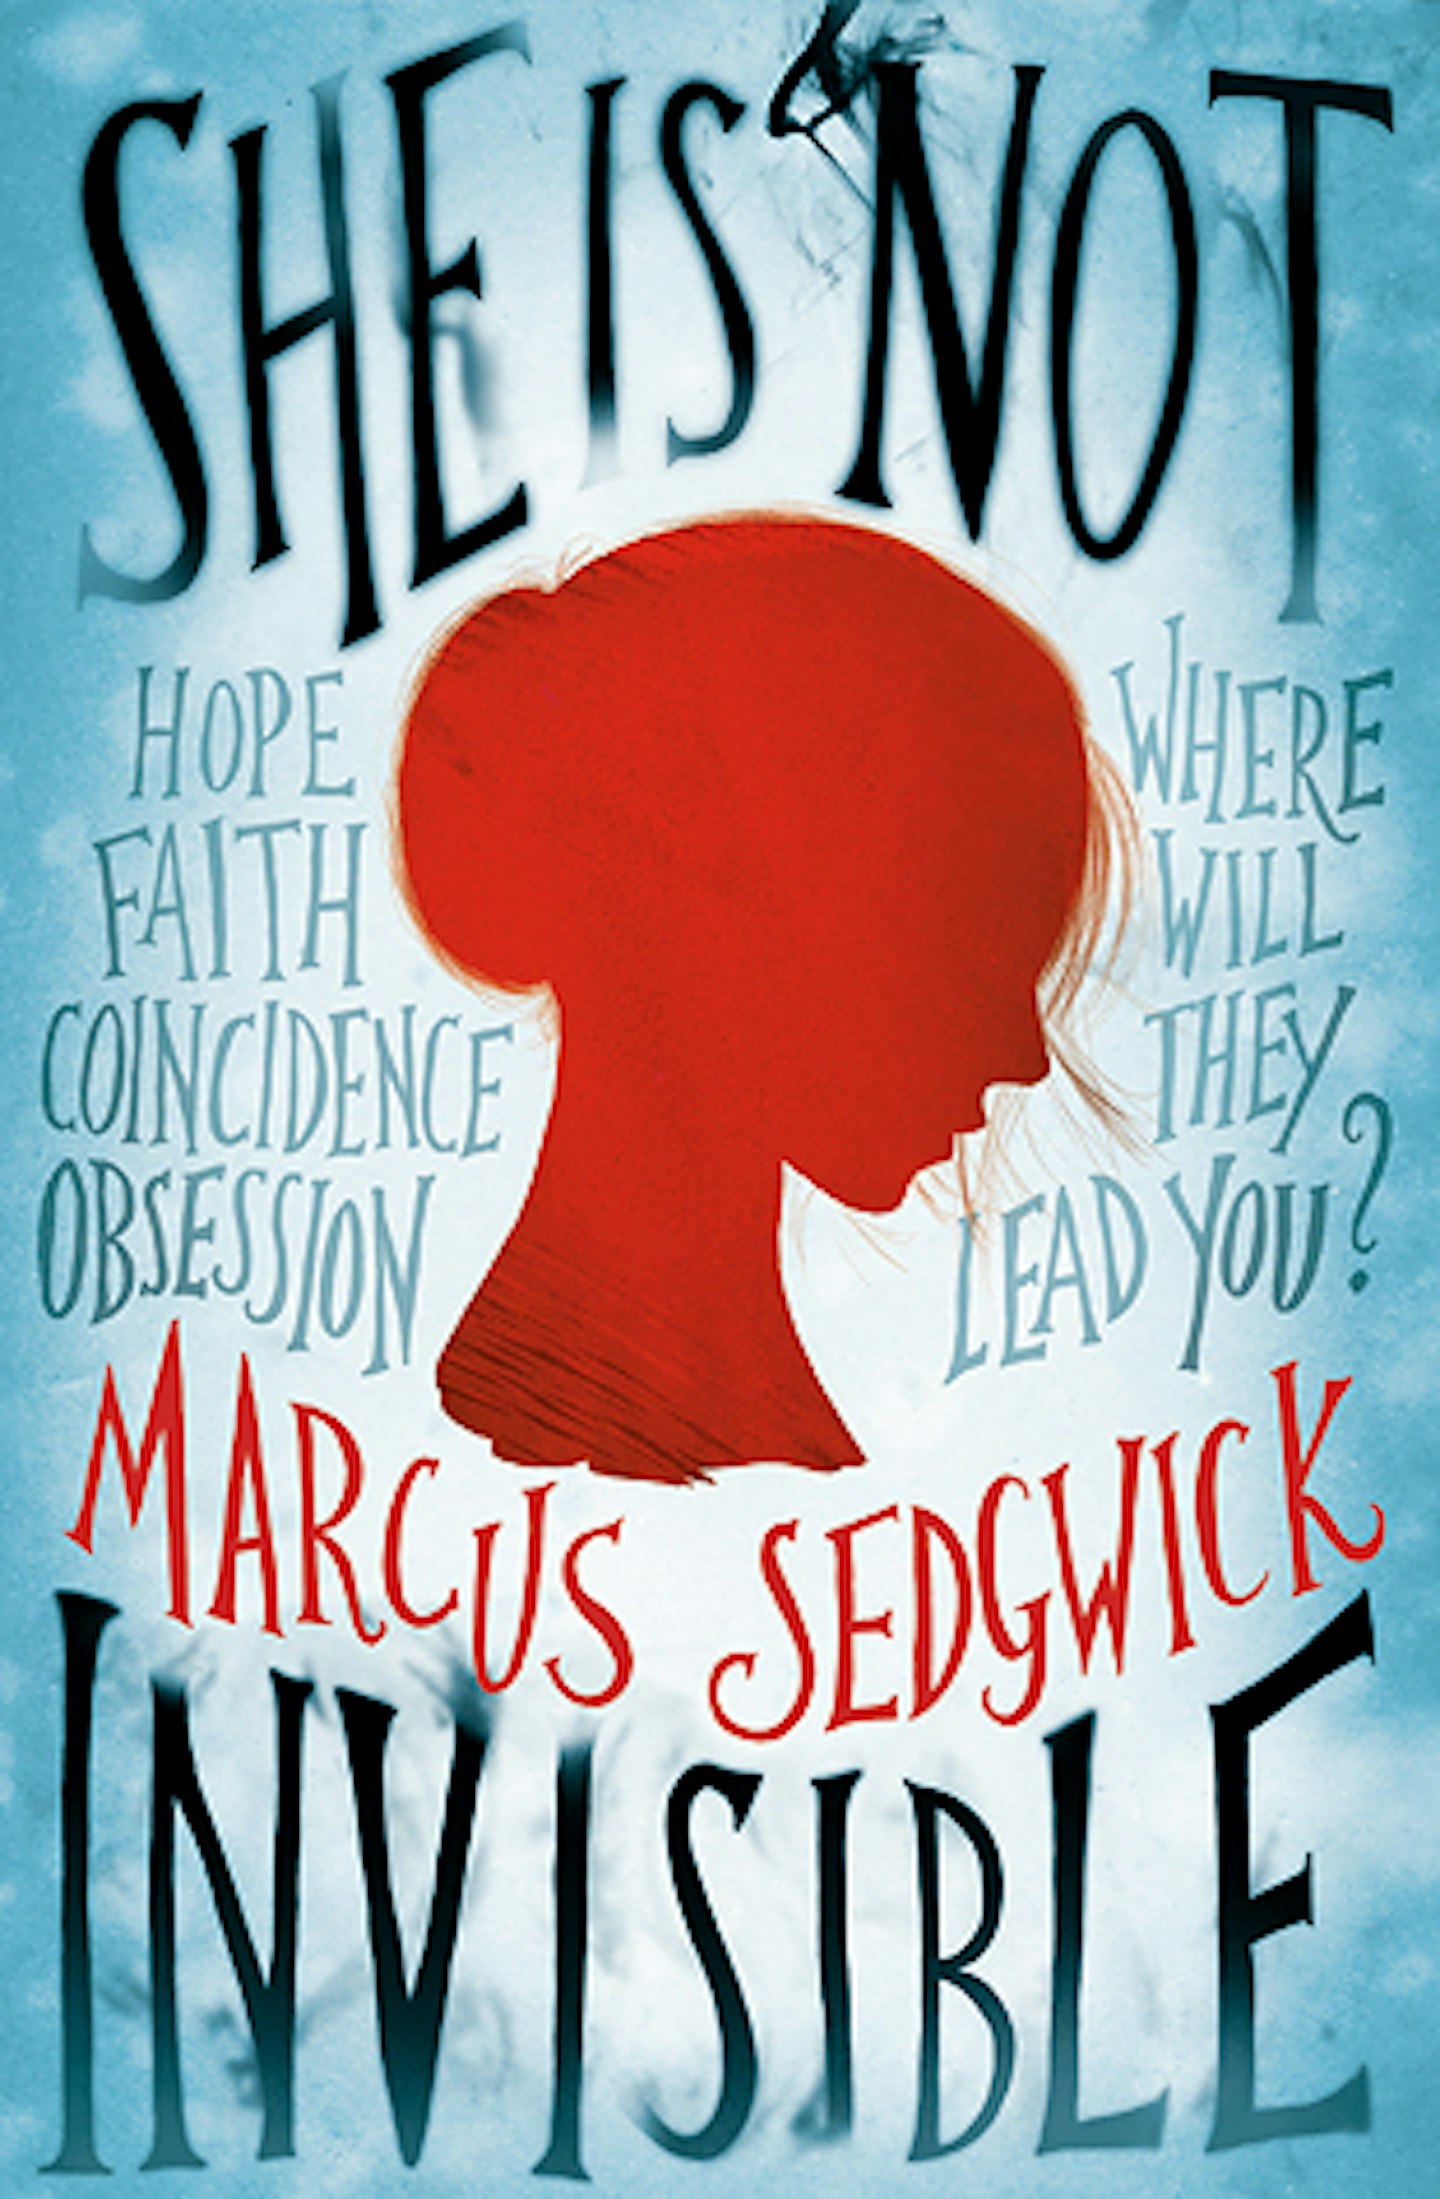 She Is Not Invisible by Marcus Sedgwick, from 2.99